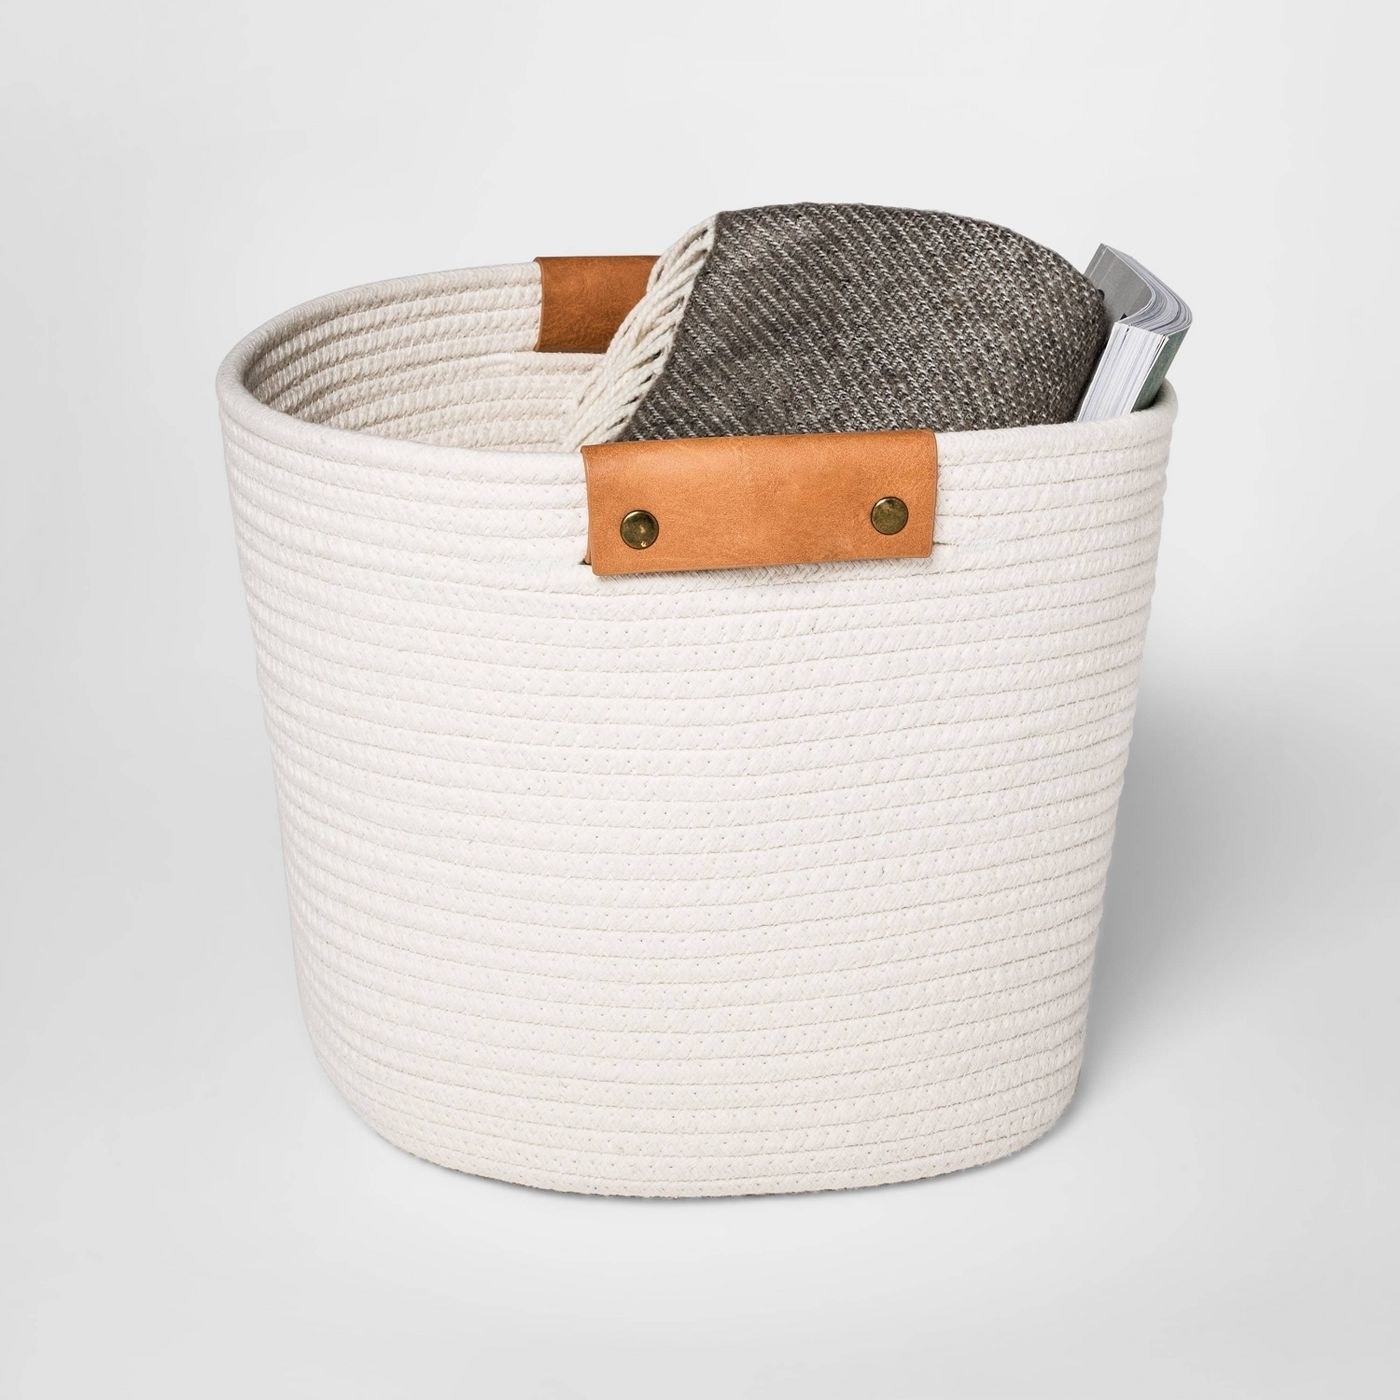 Cream basket with brown leather handles